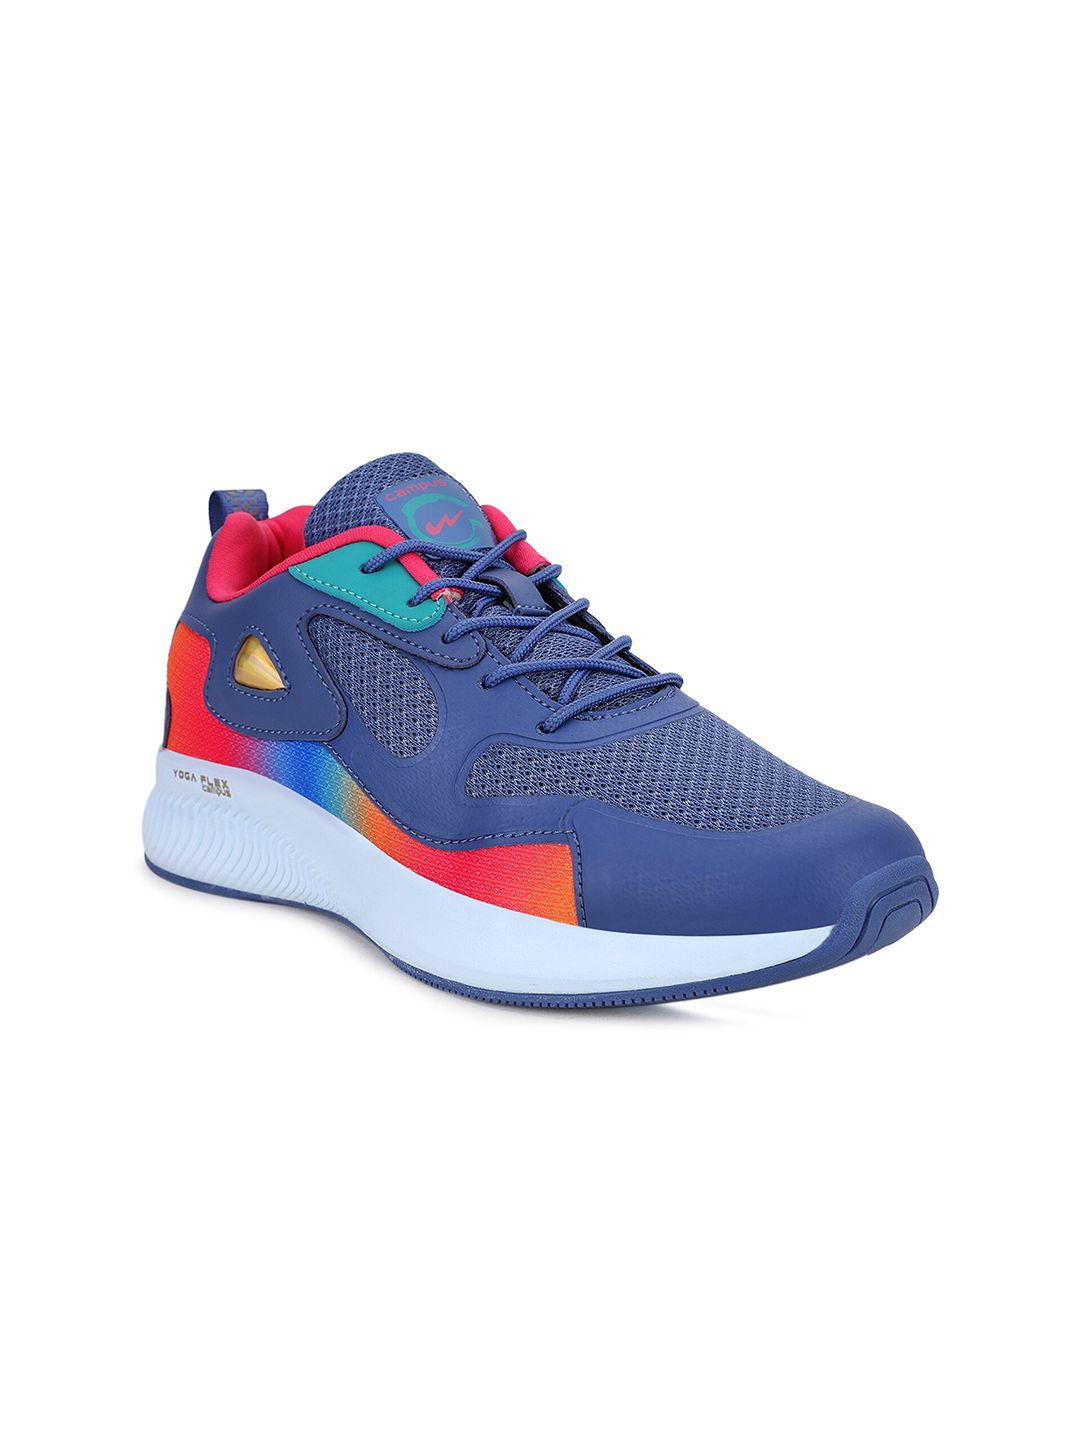 Campus Women Blue Mesh High-Top Running Shoes Price in India